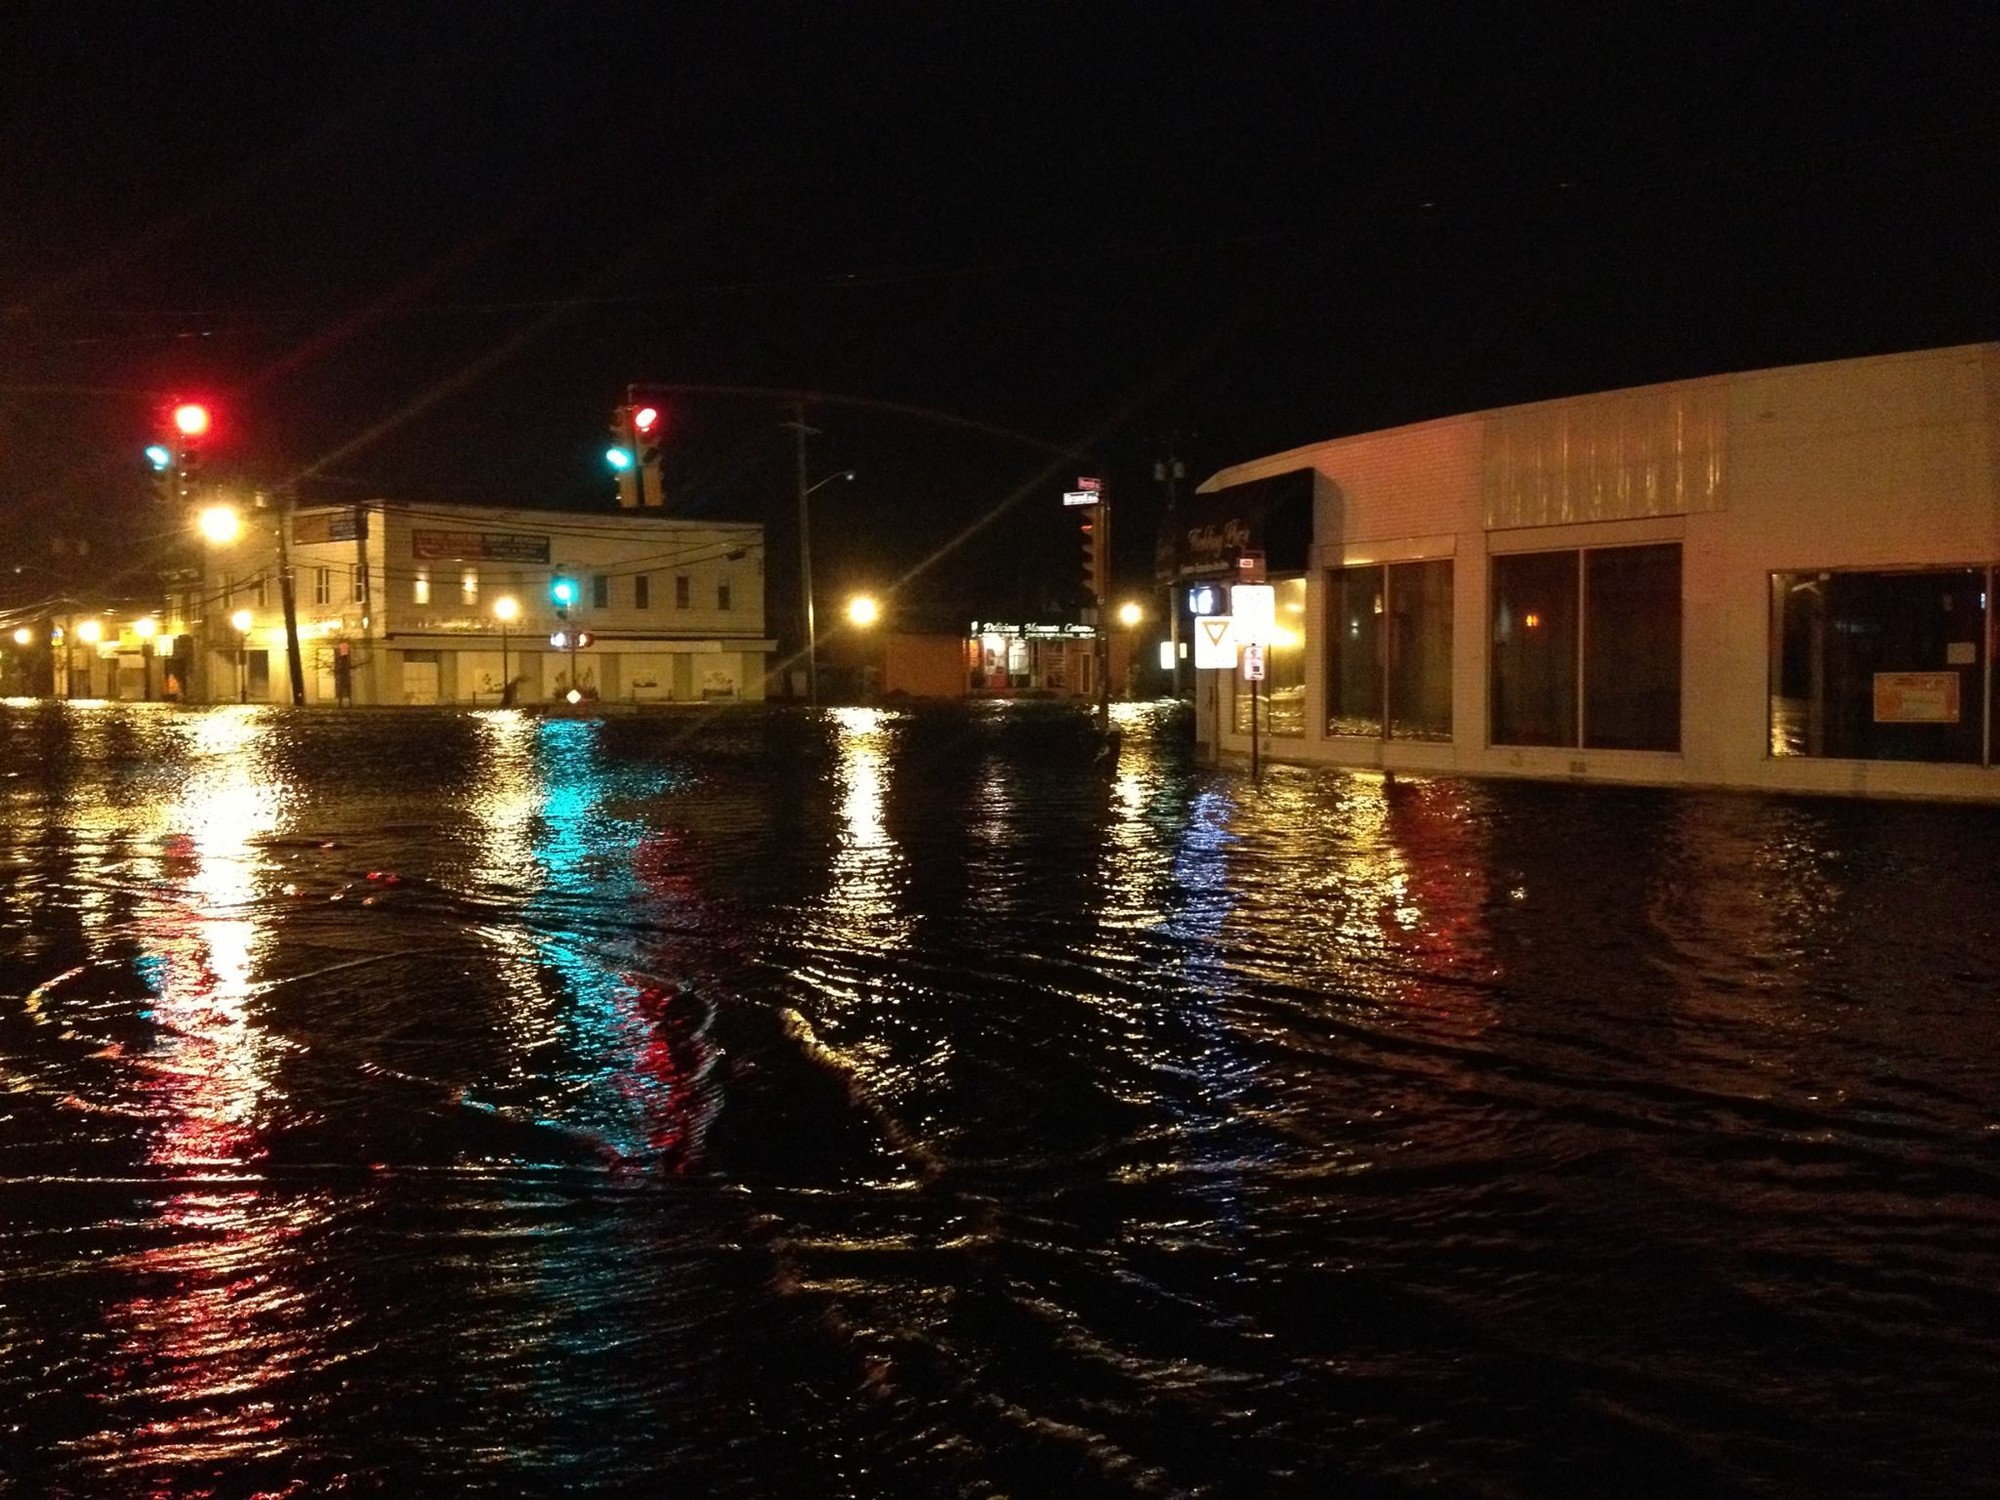 Hurricane Sandy is shown sweeping into downtown Baldwin on Oct. 29, 2012, flooding one of the community’s busiest intersections. At center, in the distance, is Steve Sciortino’s catering company, Delicious Moments, which was extensively damaged in the storm. It took Sciortino two years to recover financially.